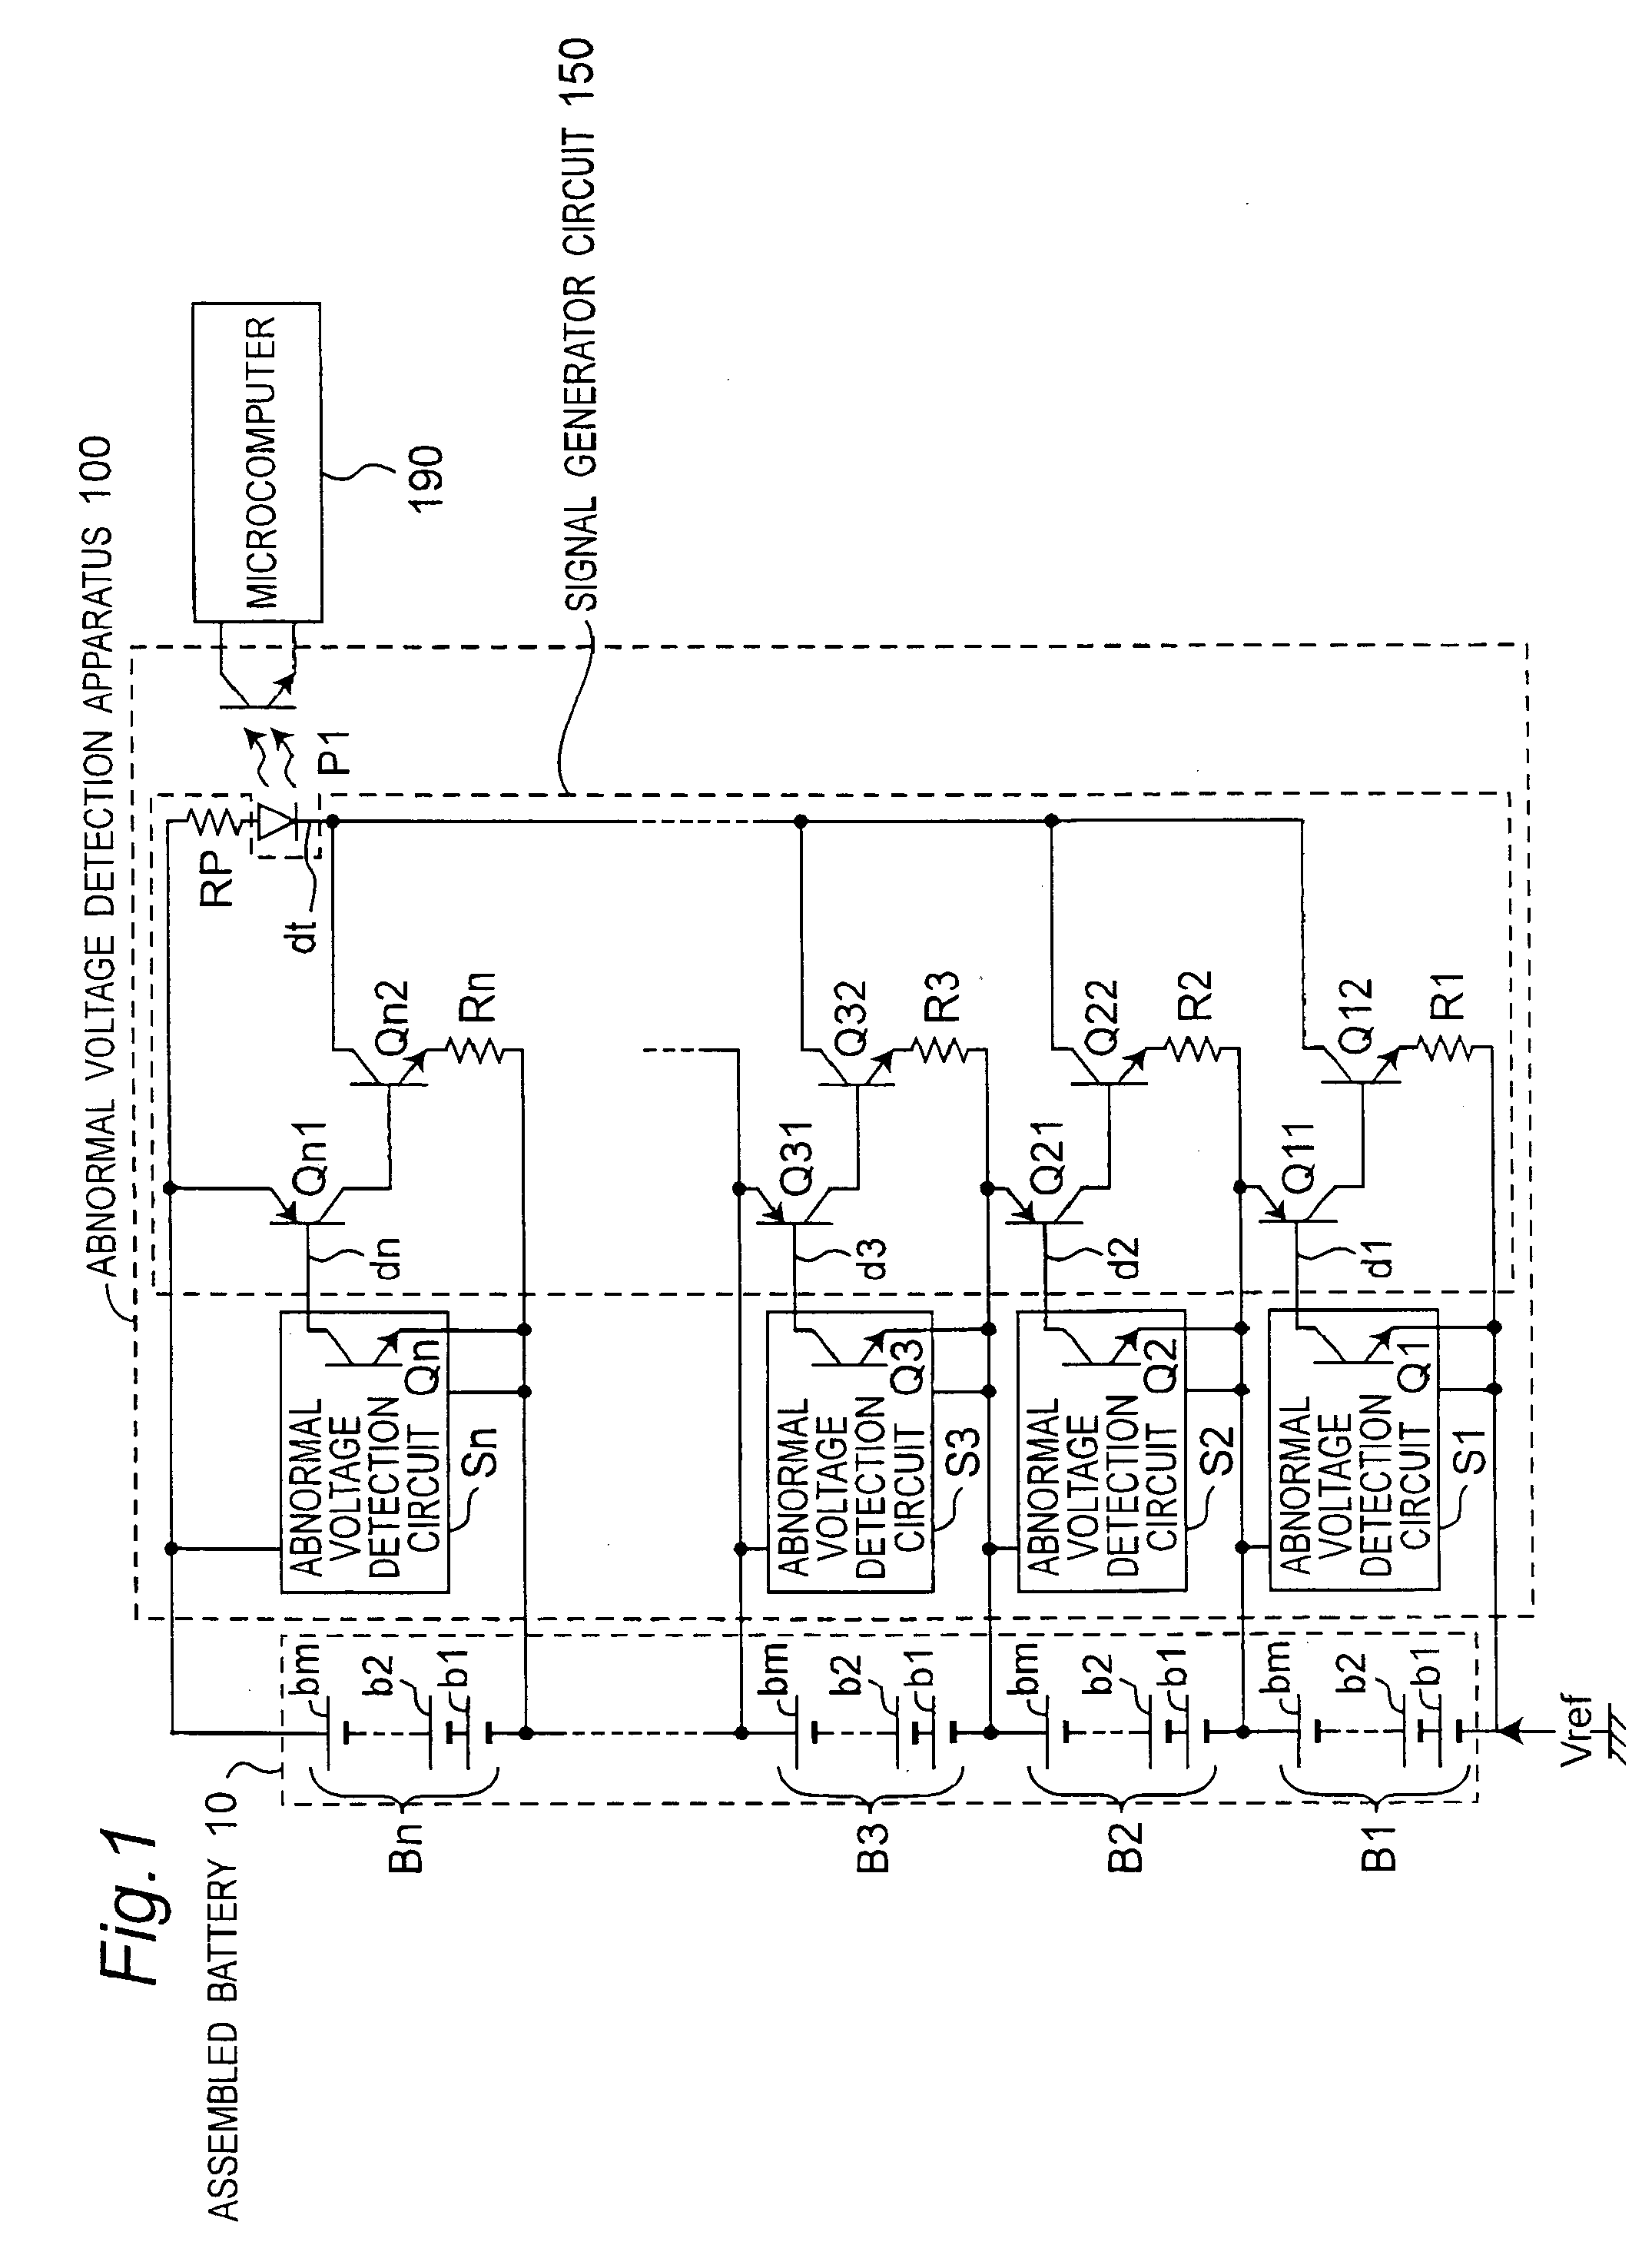 Abnormal voltage detection apparatus for detecting voltage abnormality in assembled batterey